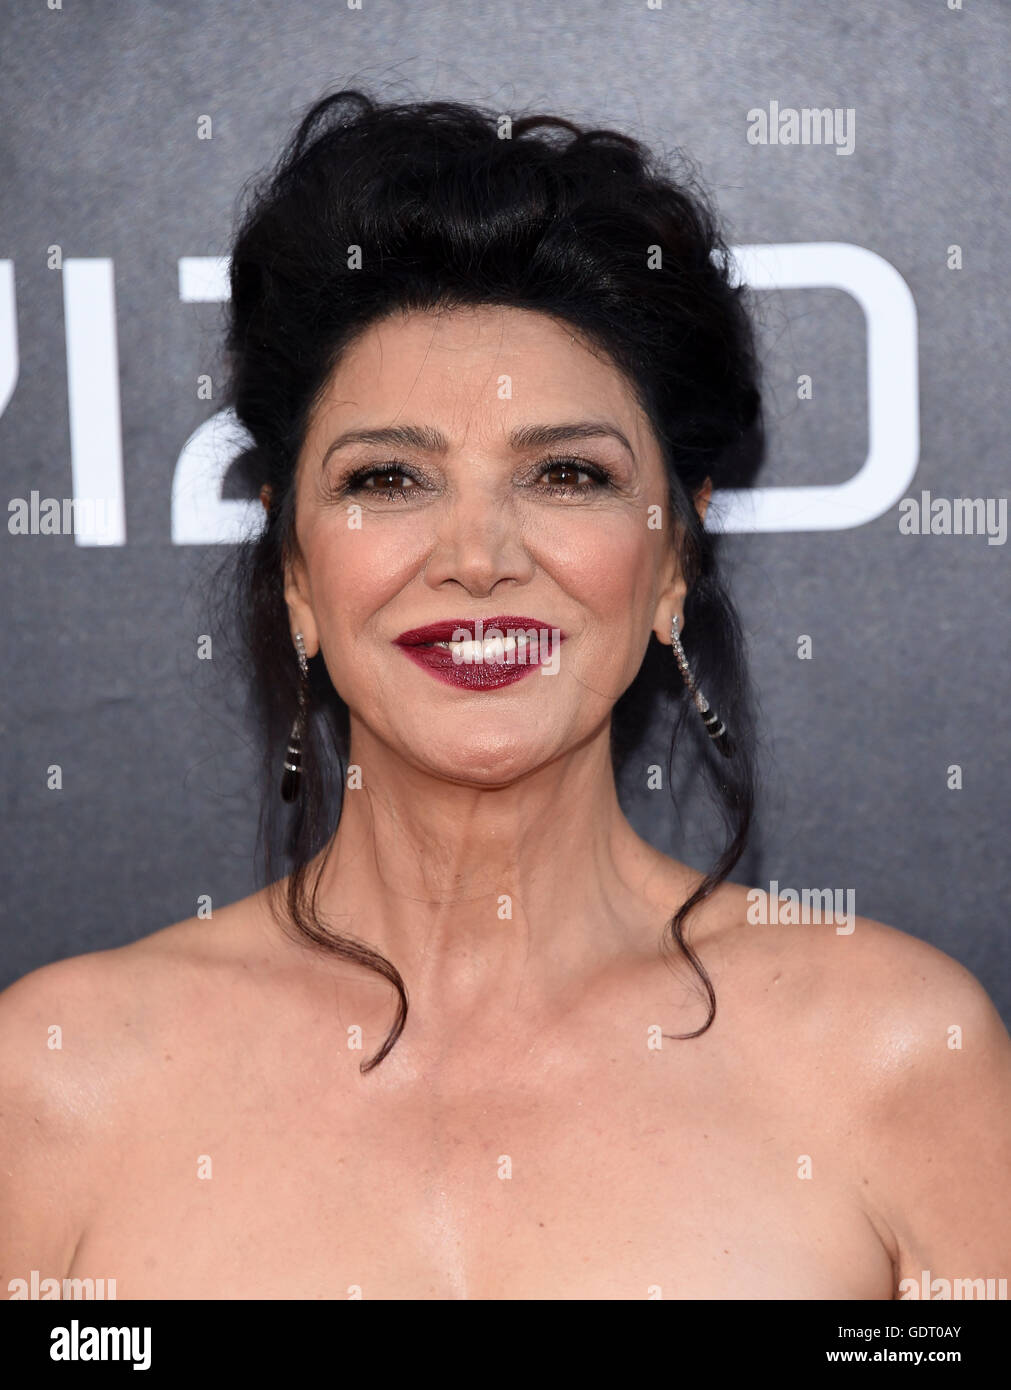 San Diego, California, USA. 20th July, 2016. Shohreh Aghdashloo arrives for the premiere of the film 'Star Trek Beyond' at the Embarcadero Marina Park. Credit:  Lisa O'Connor/ZUMA Wire/Alamy Live News Stock Photo